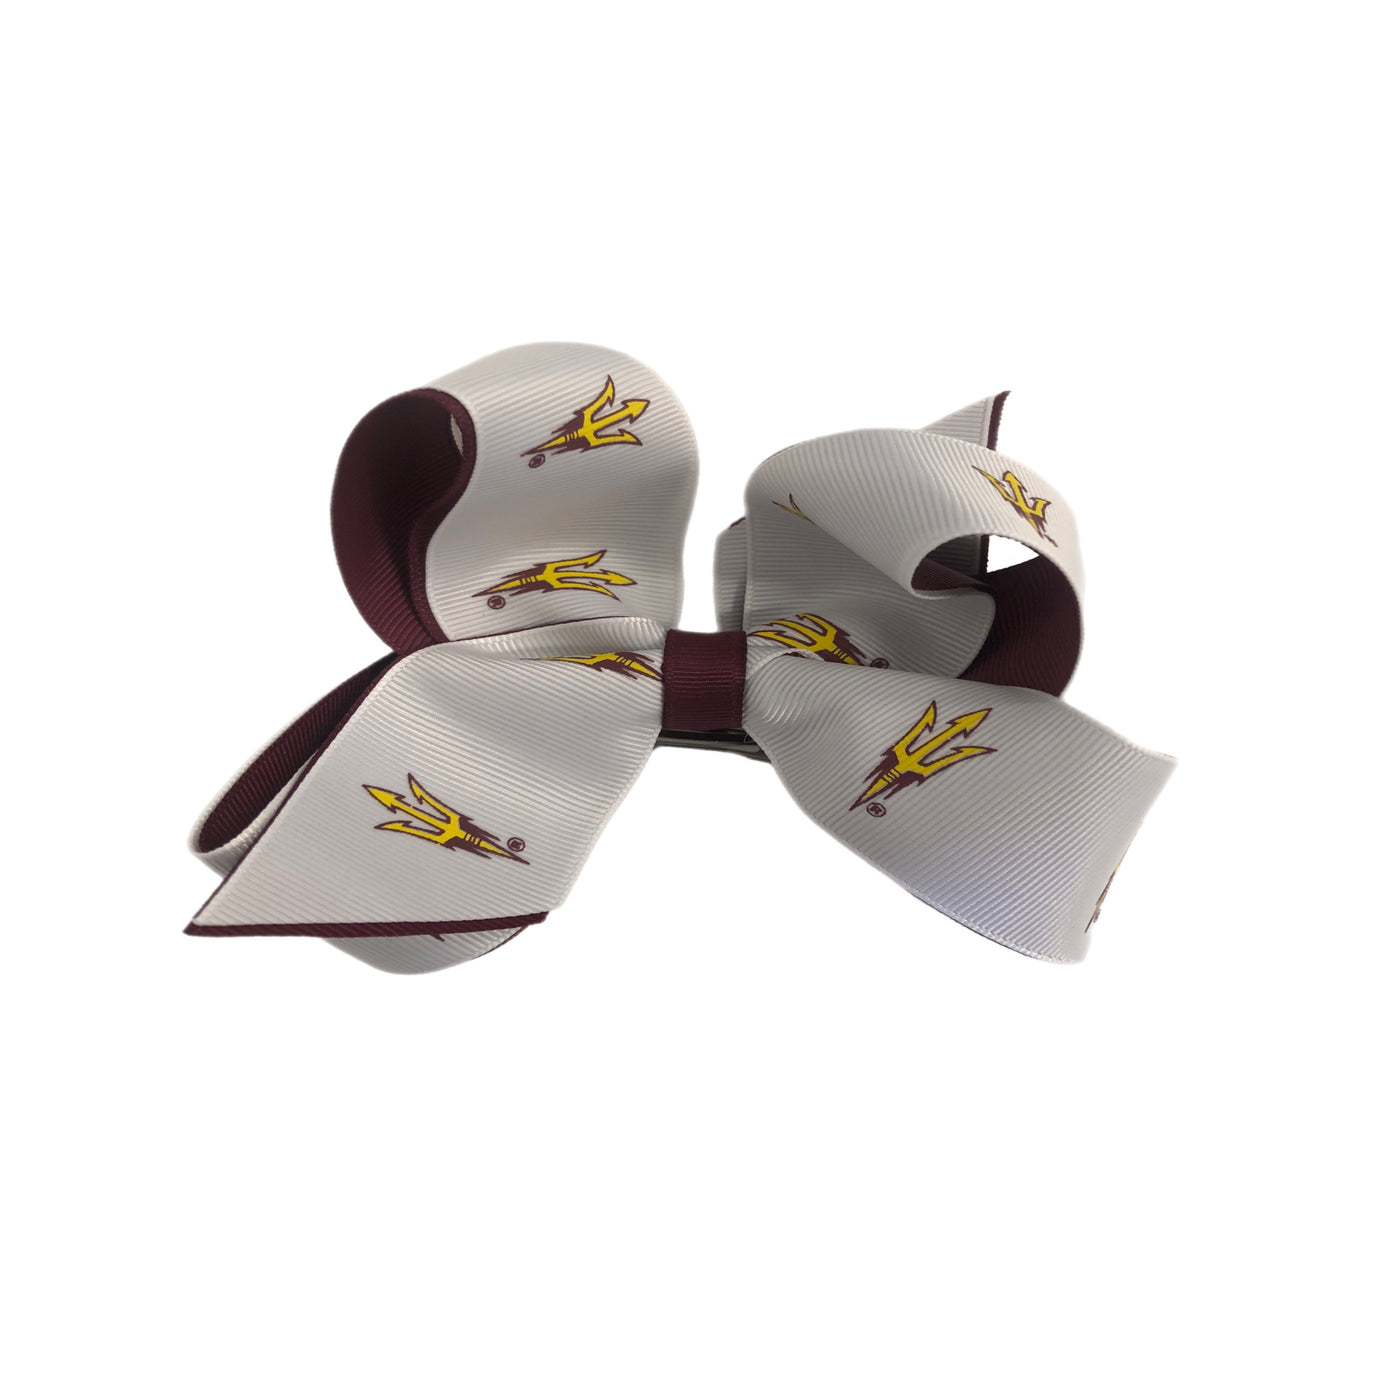 ASU small bow with both white and maroon ribbon. The white ribbon has pitchforks on it.